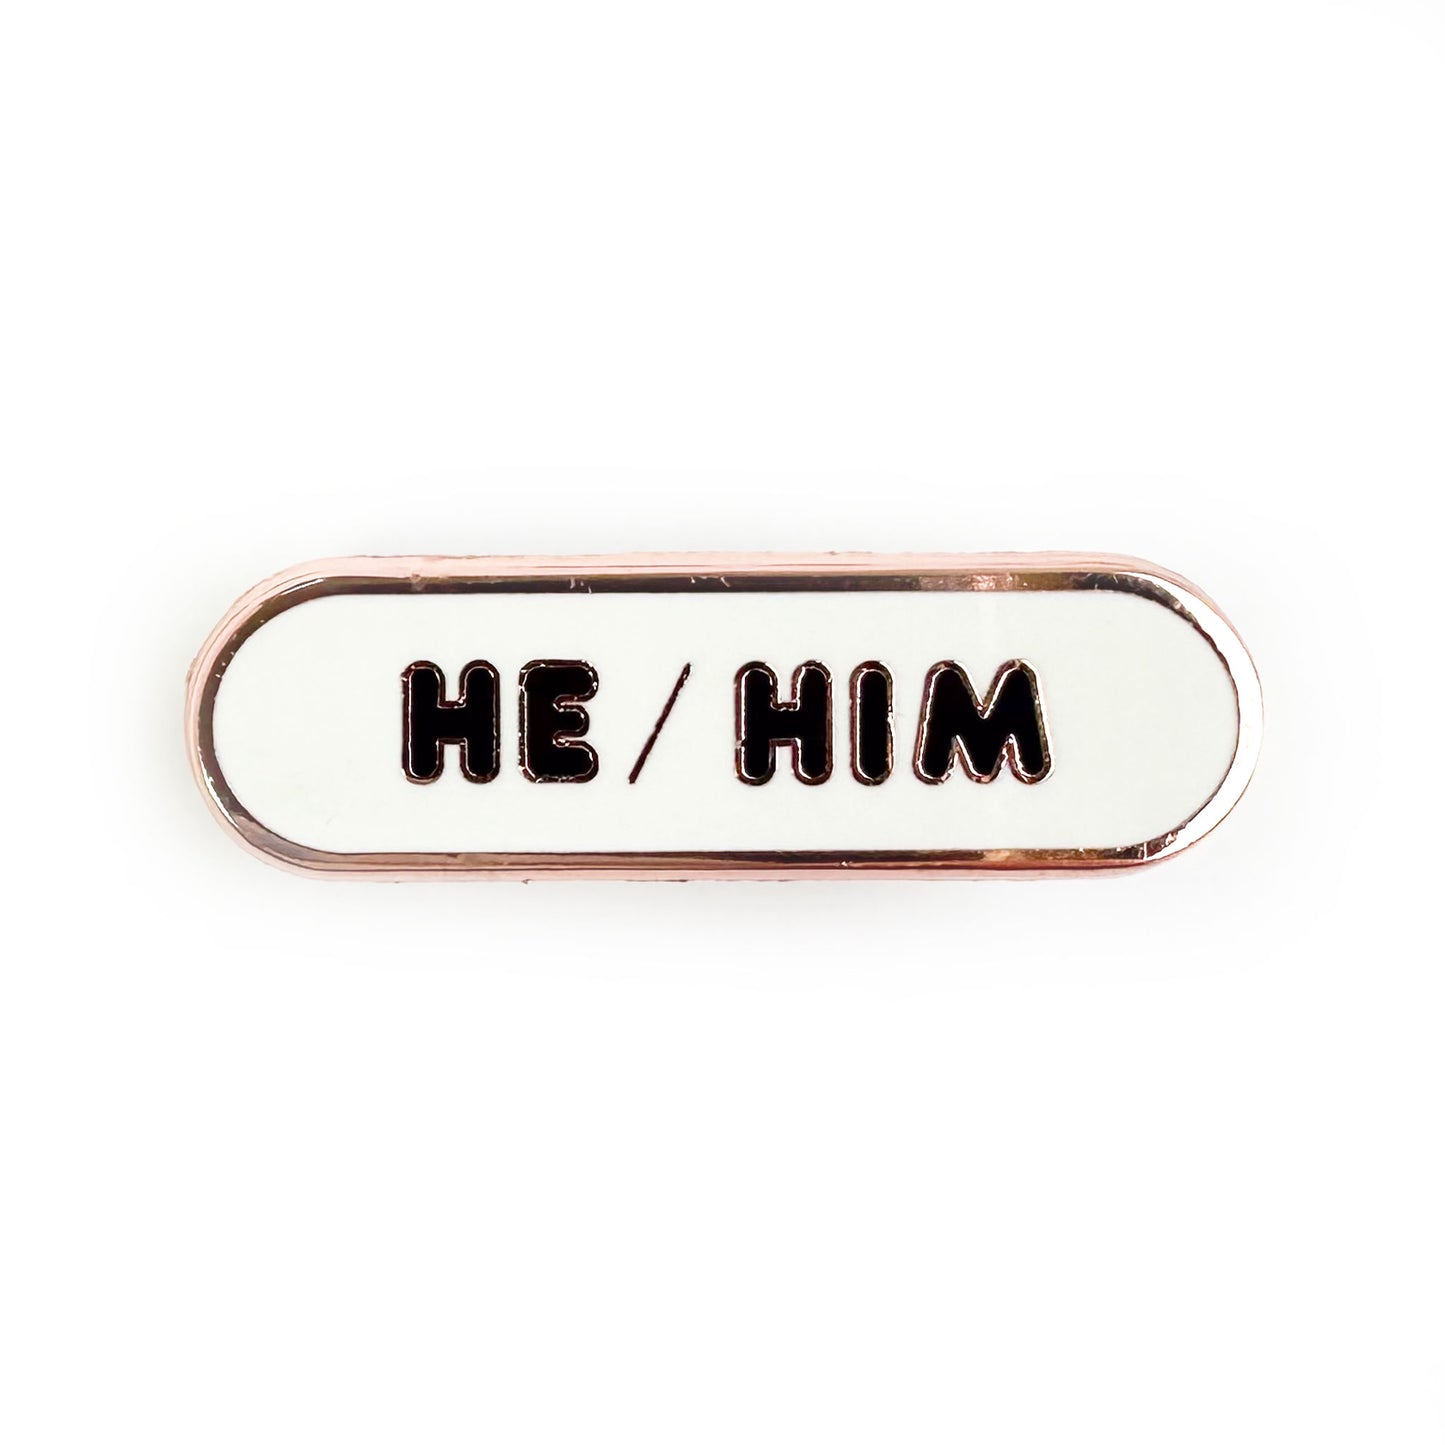 A white capsule shaped pin that reads "He/Him".